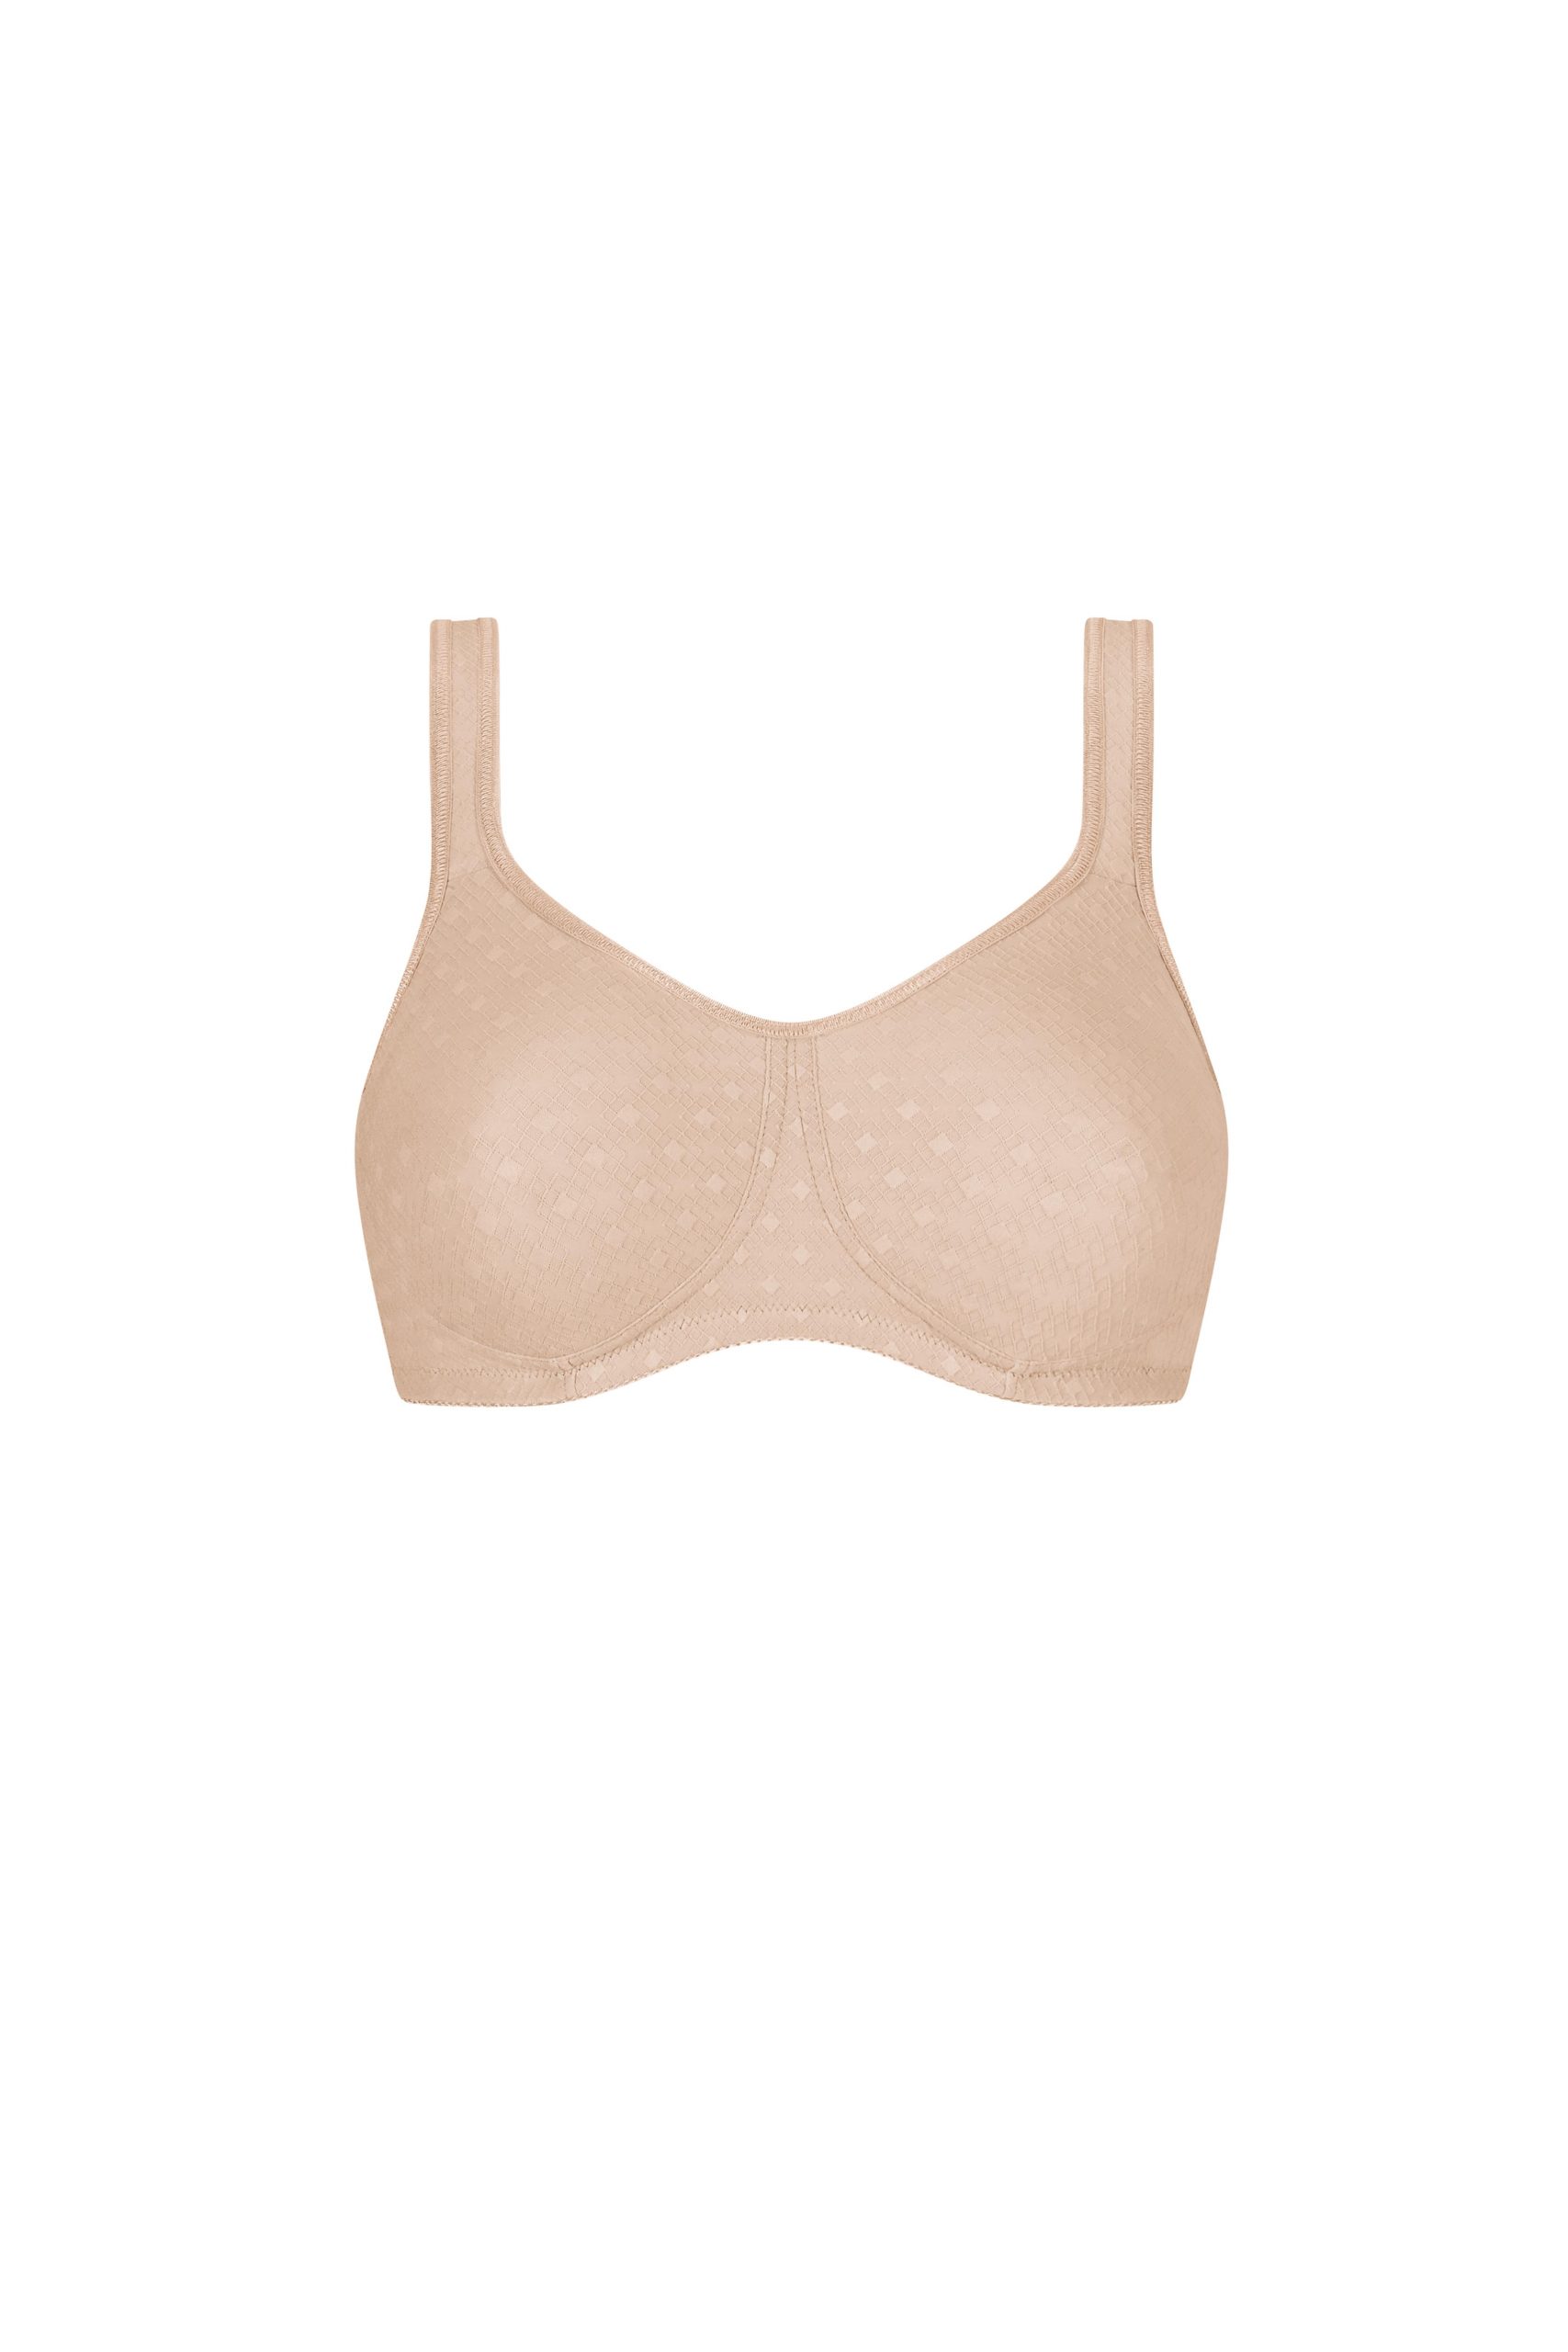 Mastectomy Bra Jacquard Soft Cup Size 40A White